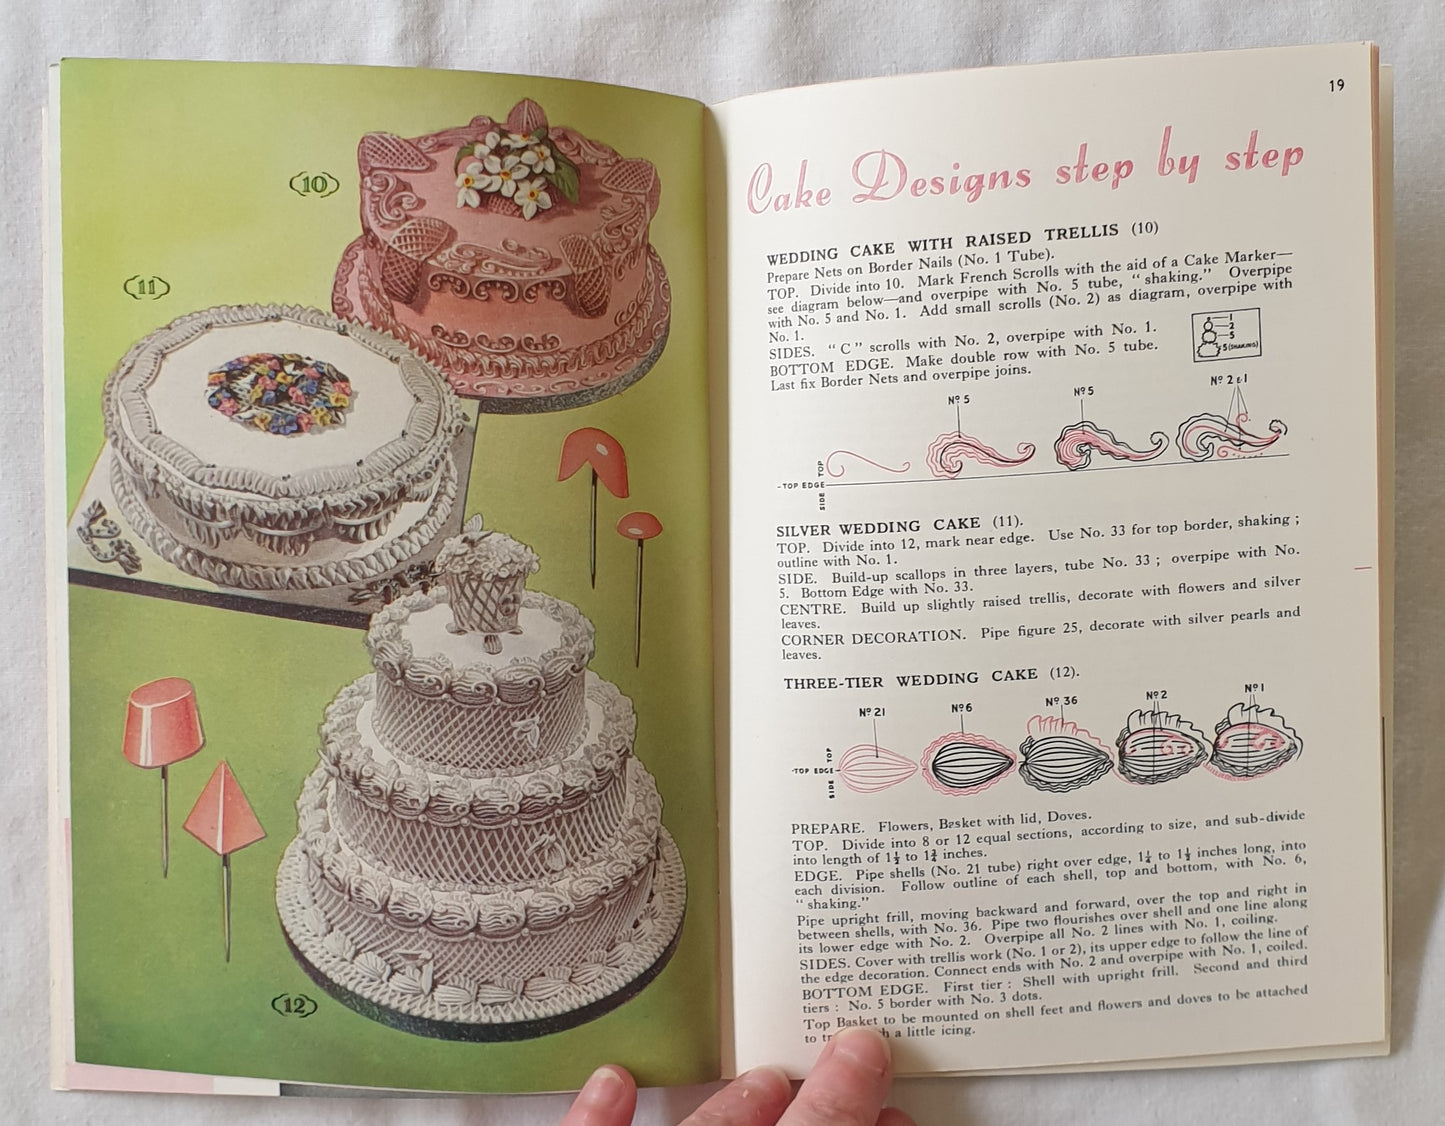 How to Decorate a Cake by Anne Anson